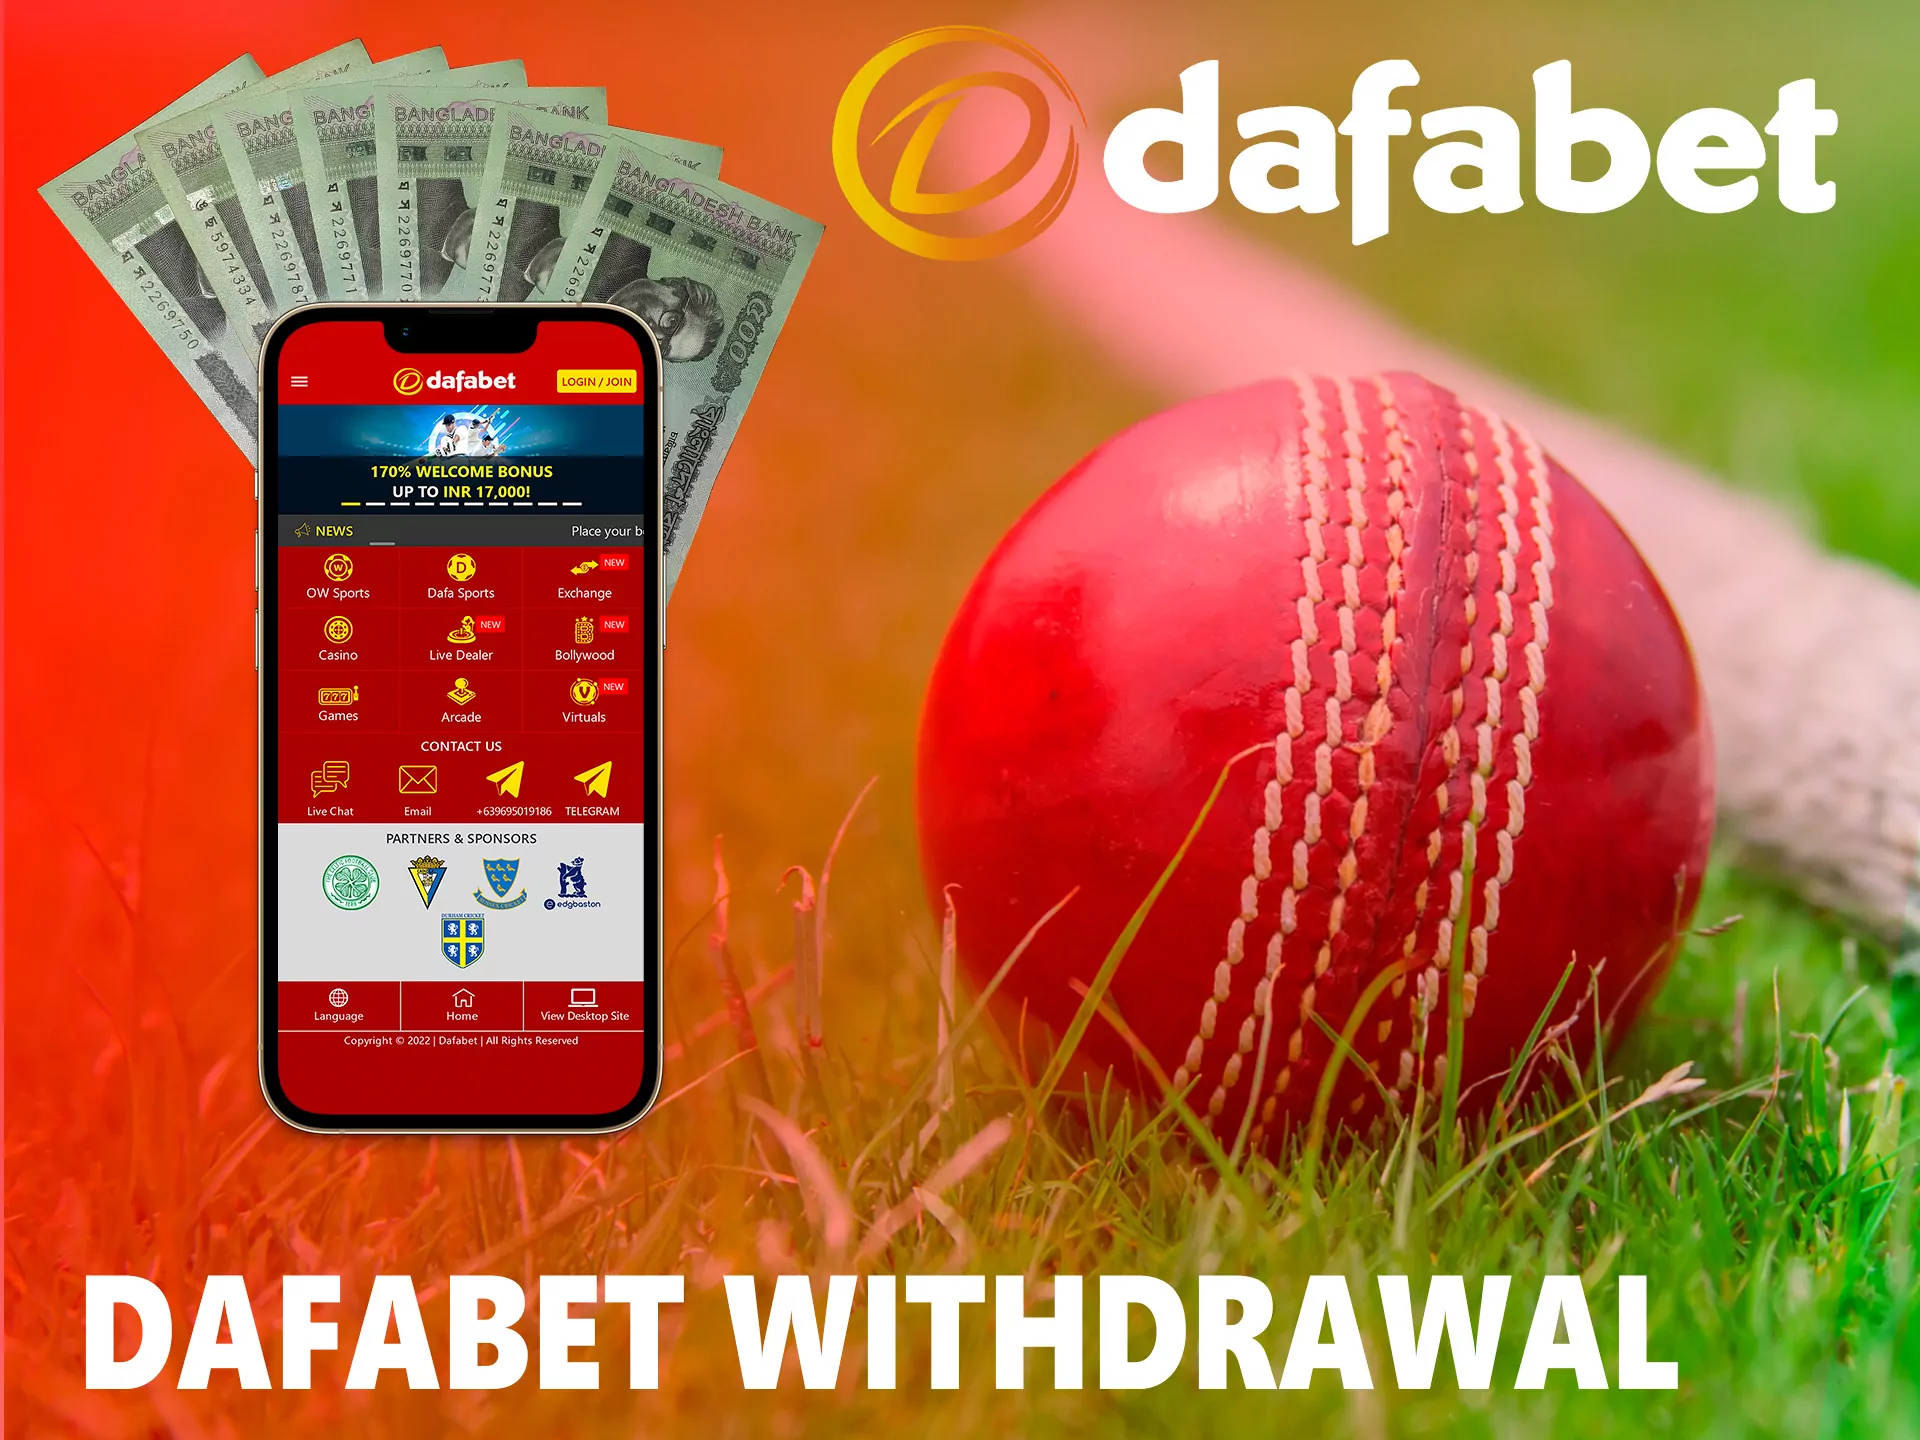 Get money that you win in Dafabet in a couple of kicks, and our guide will help.